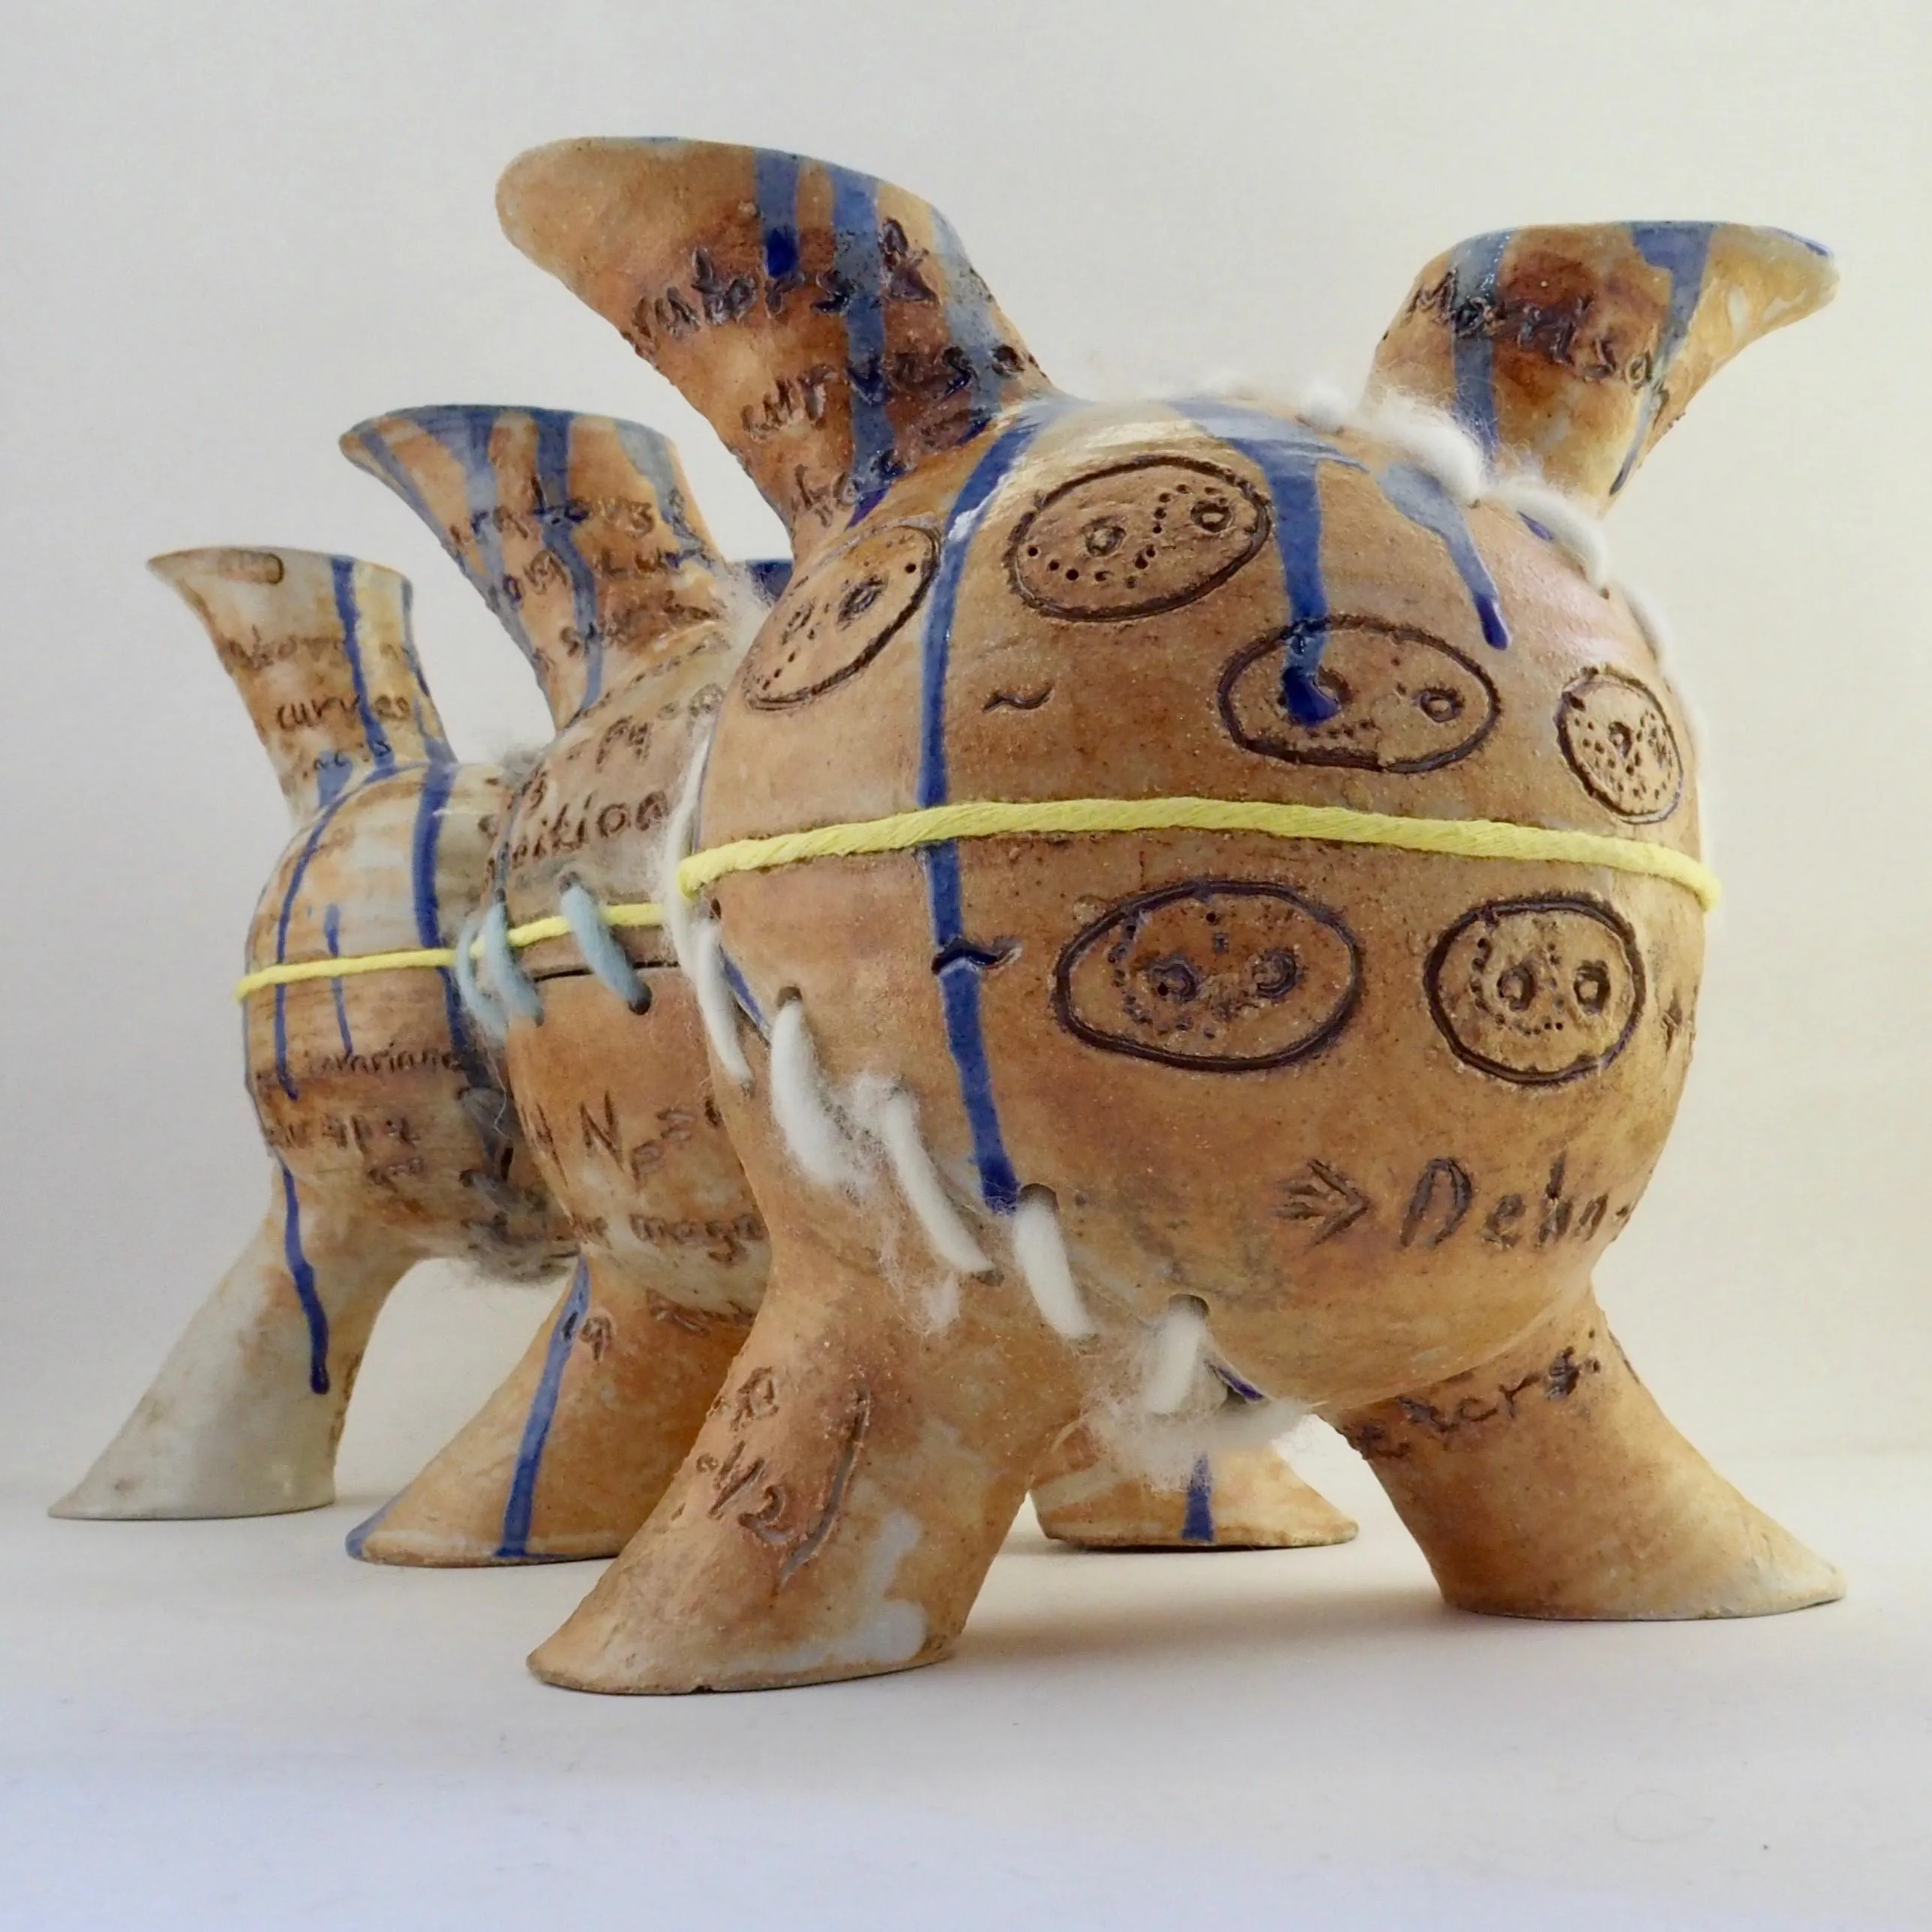 One of Nadav's ceramics which also features string